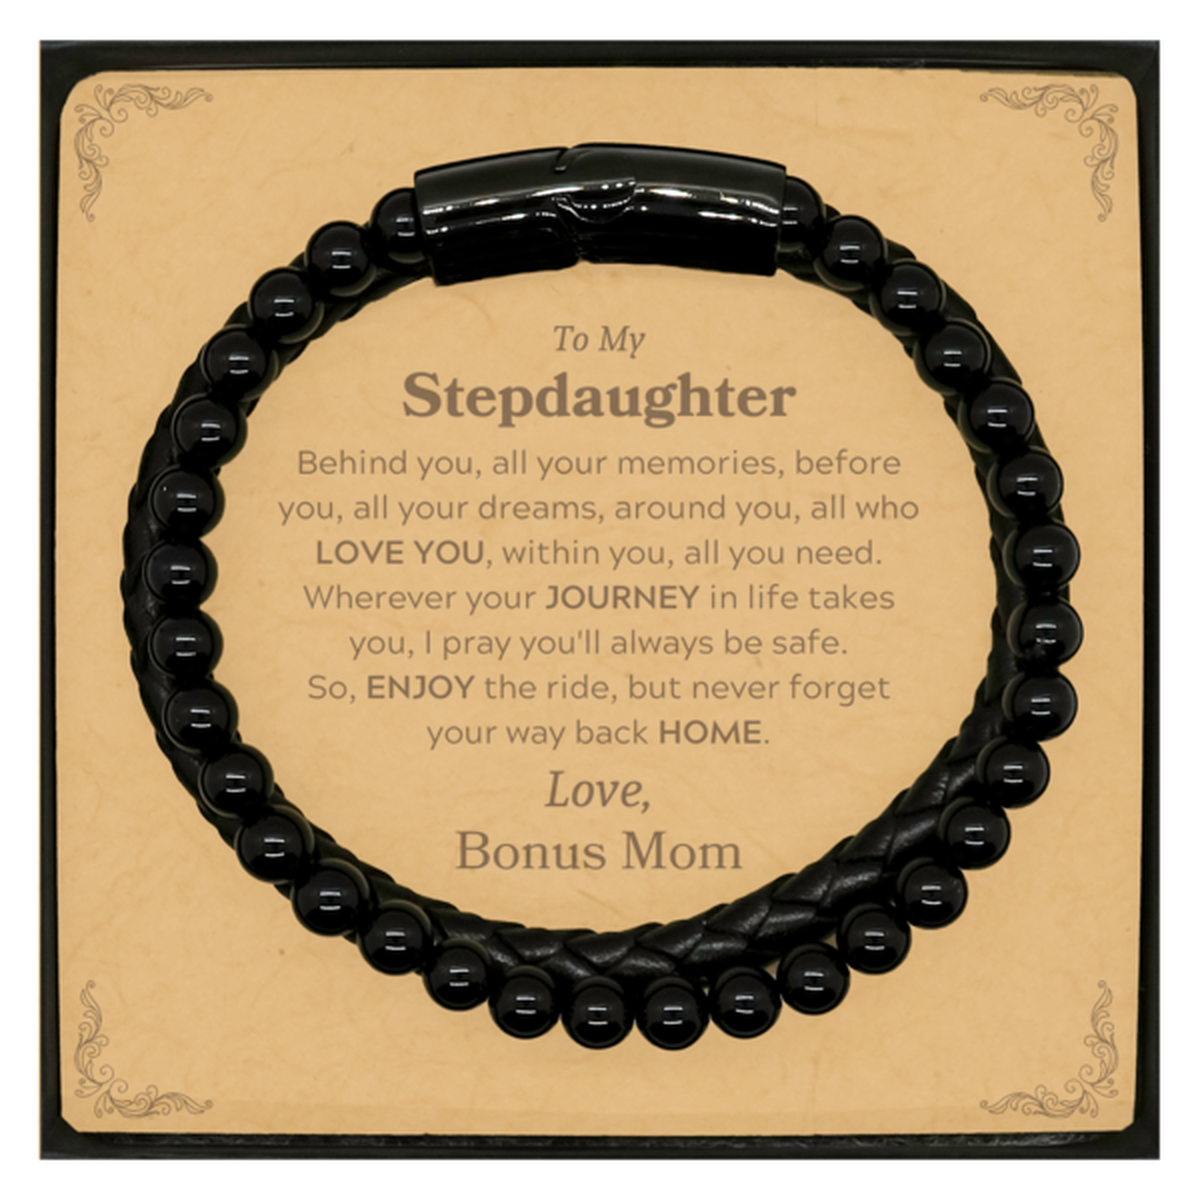 To My Stepdaughter Graduation Gifts from Bonus Mom, Stepdaughter Stone Leather Bracelets Christmas Birthday Gifts for Stepdaughter Behind you, all your memories, before you, all your dreams. Love, Bonus Mom